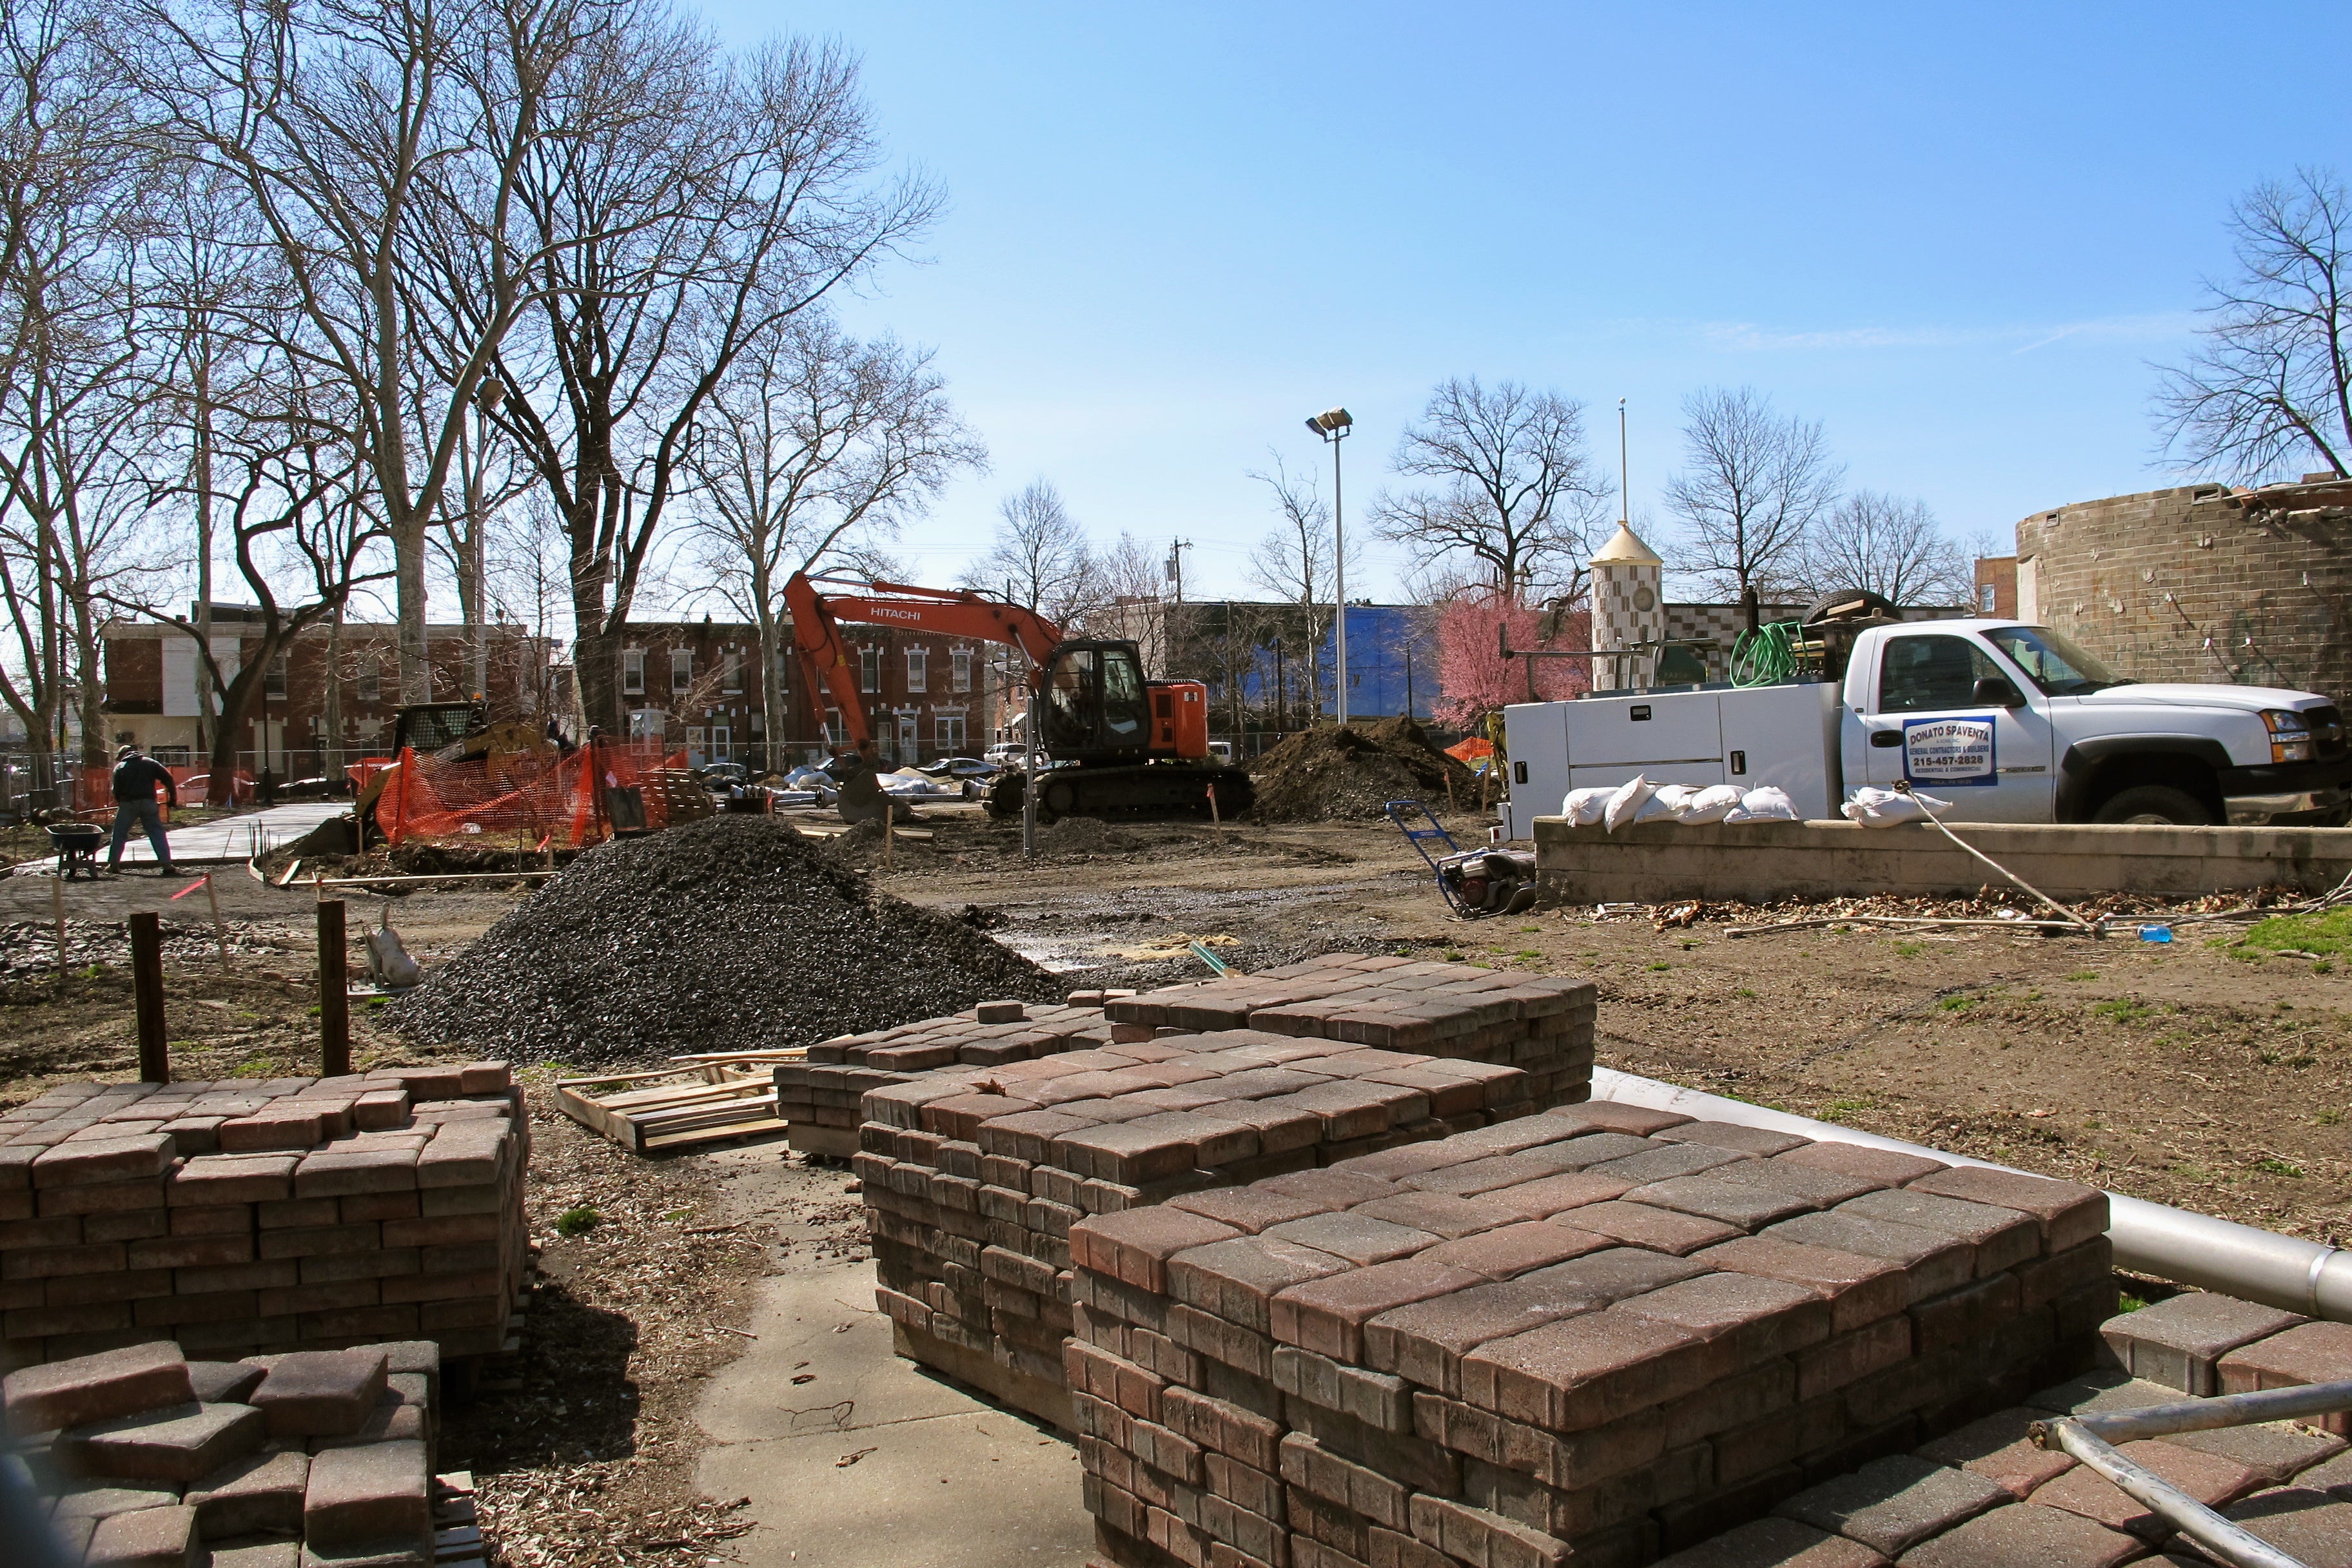 Dickinson Square park's facelift is well underway and new paths are starting to take shape.